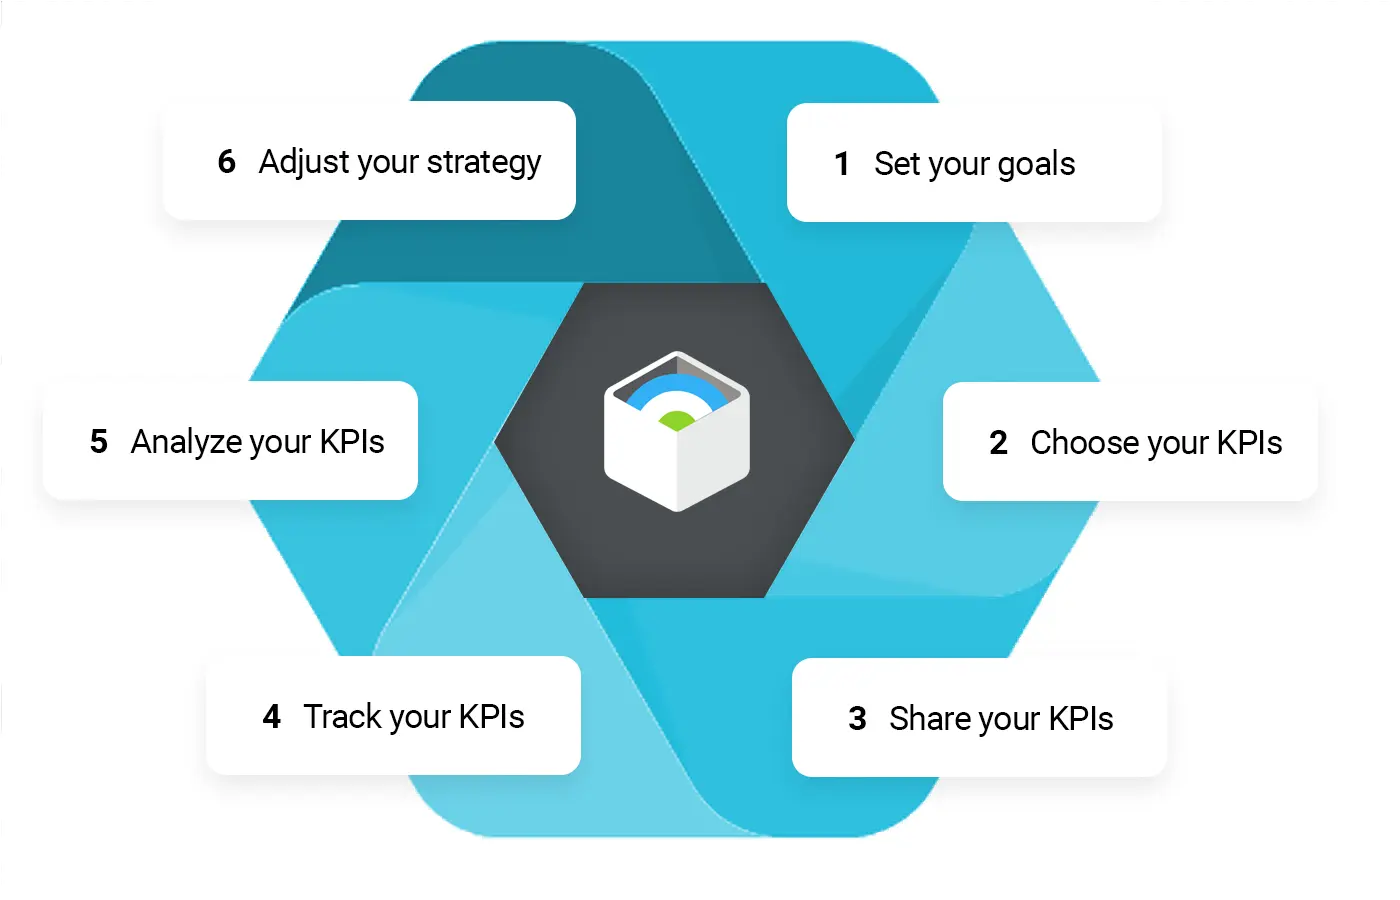 a hexagon diagram showing connected blue segments labled with the steps of a kpi social media strategy.